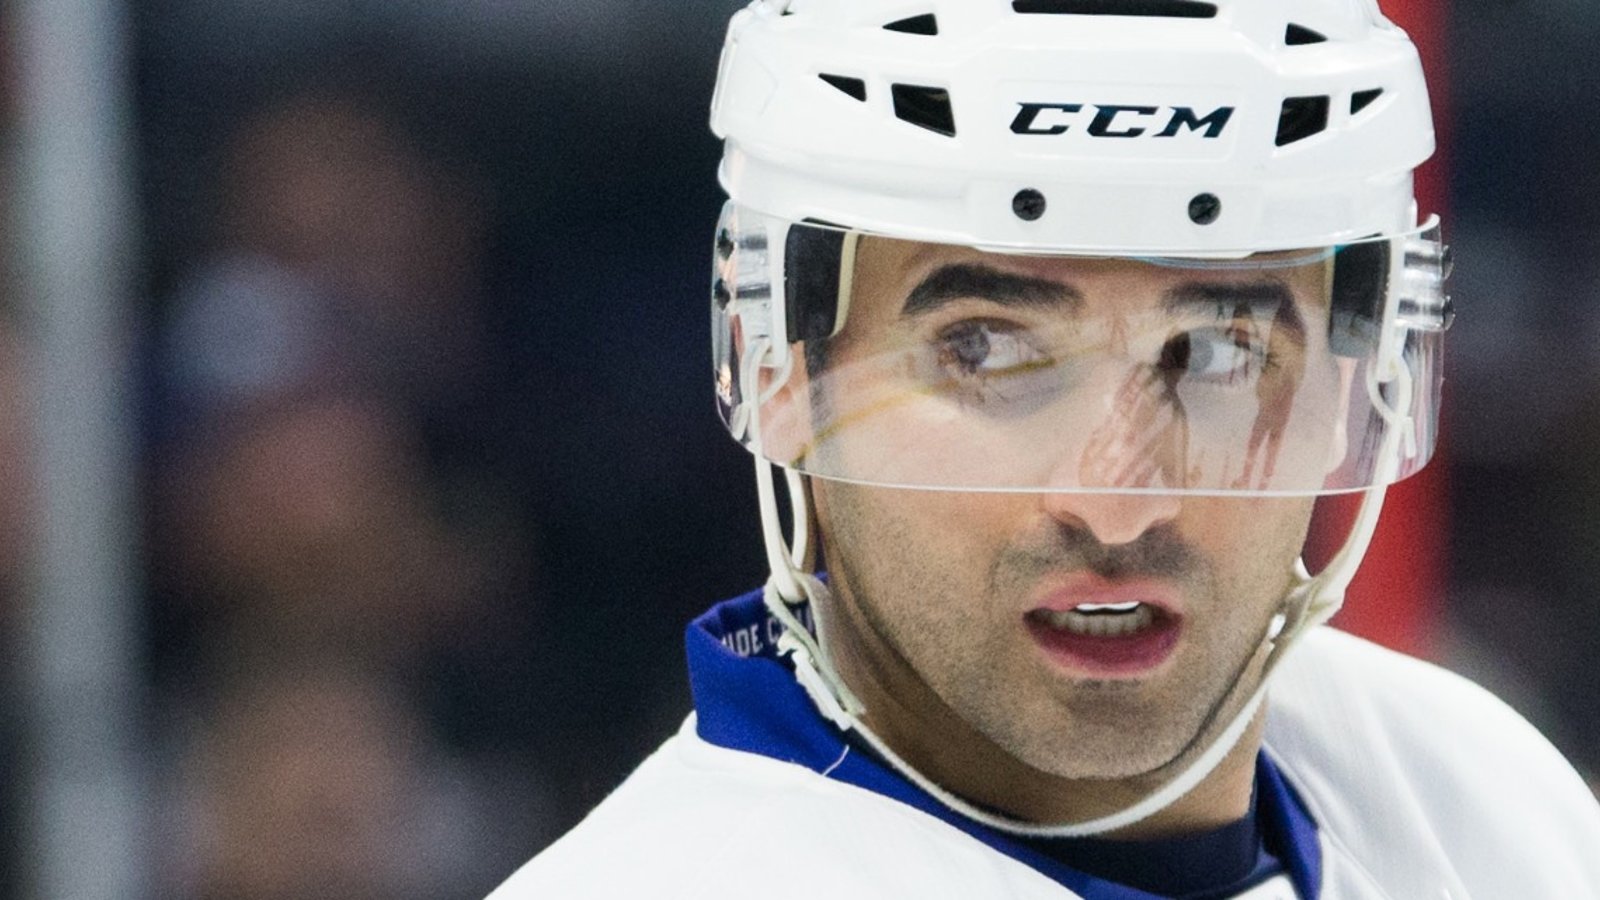 Nazem Kadri laughs at threats from player he laid big hit on.